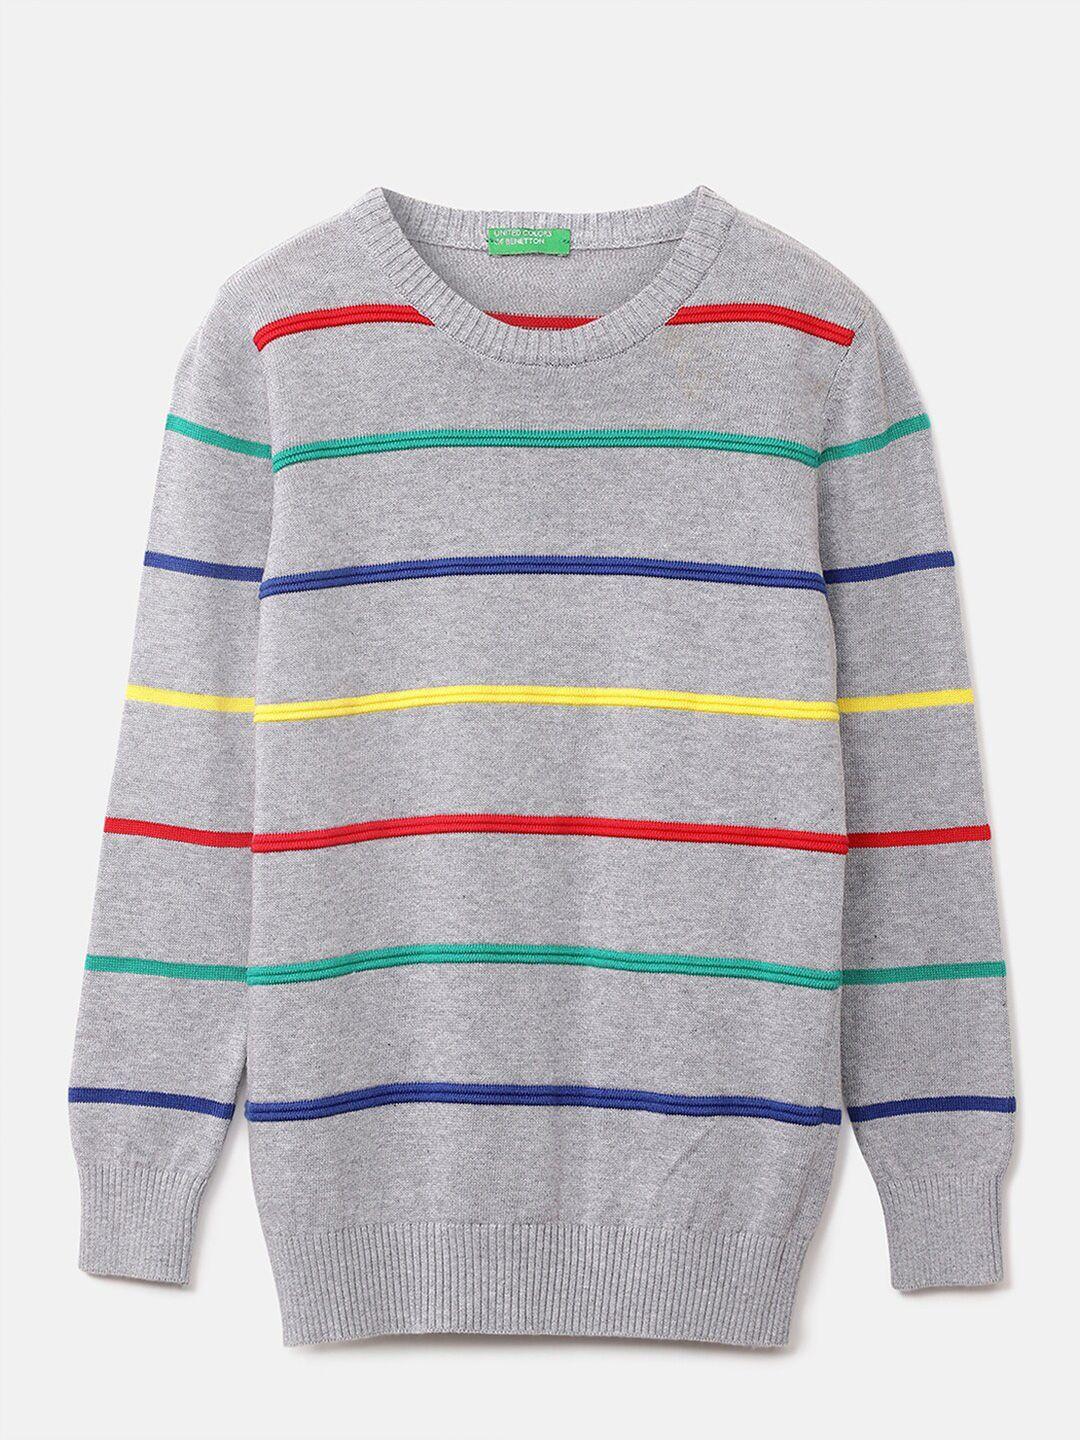 united-colors-of-benetton-boys-grey-&-blue-striped-pullover